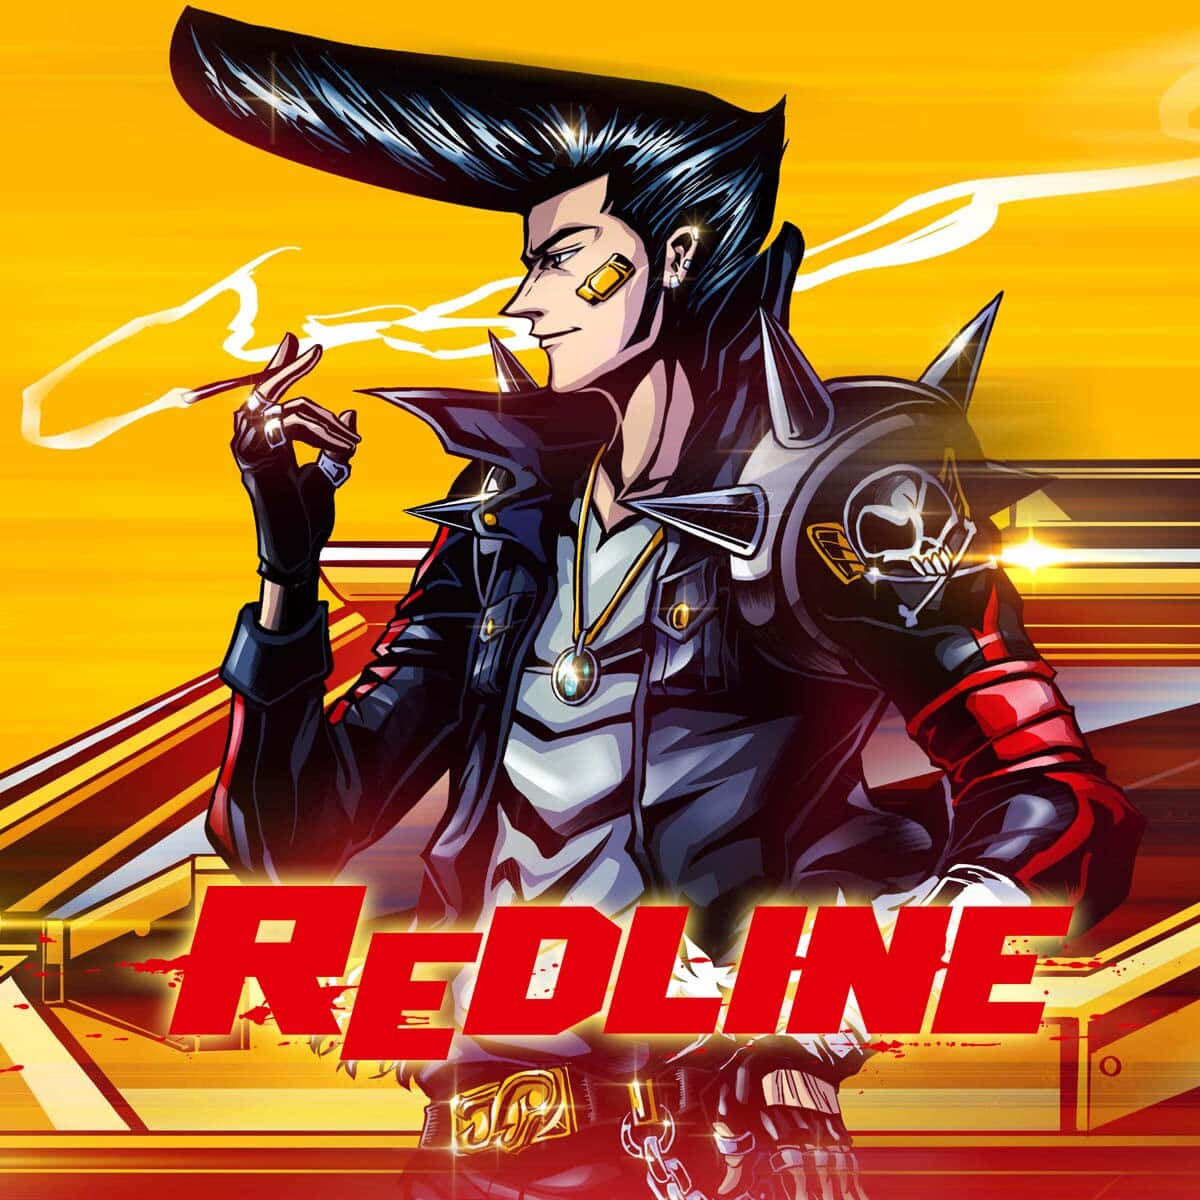 Check out this colorful Redline background Wallpaper